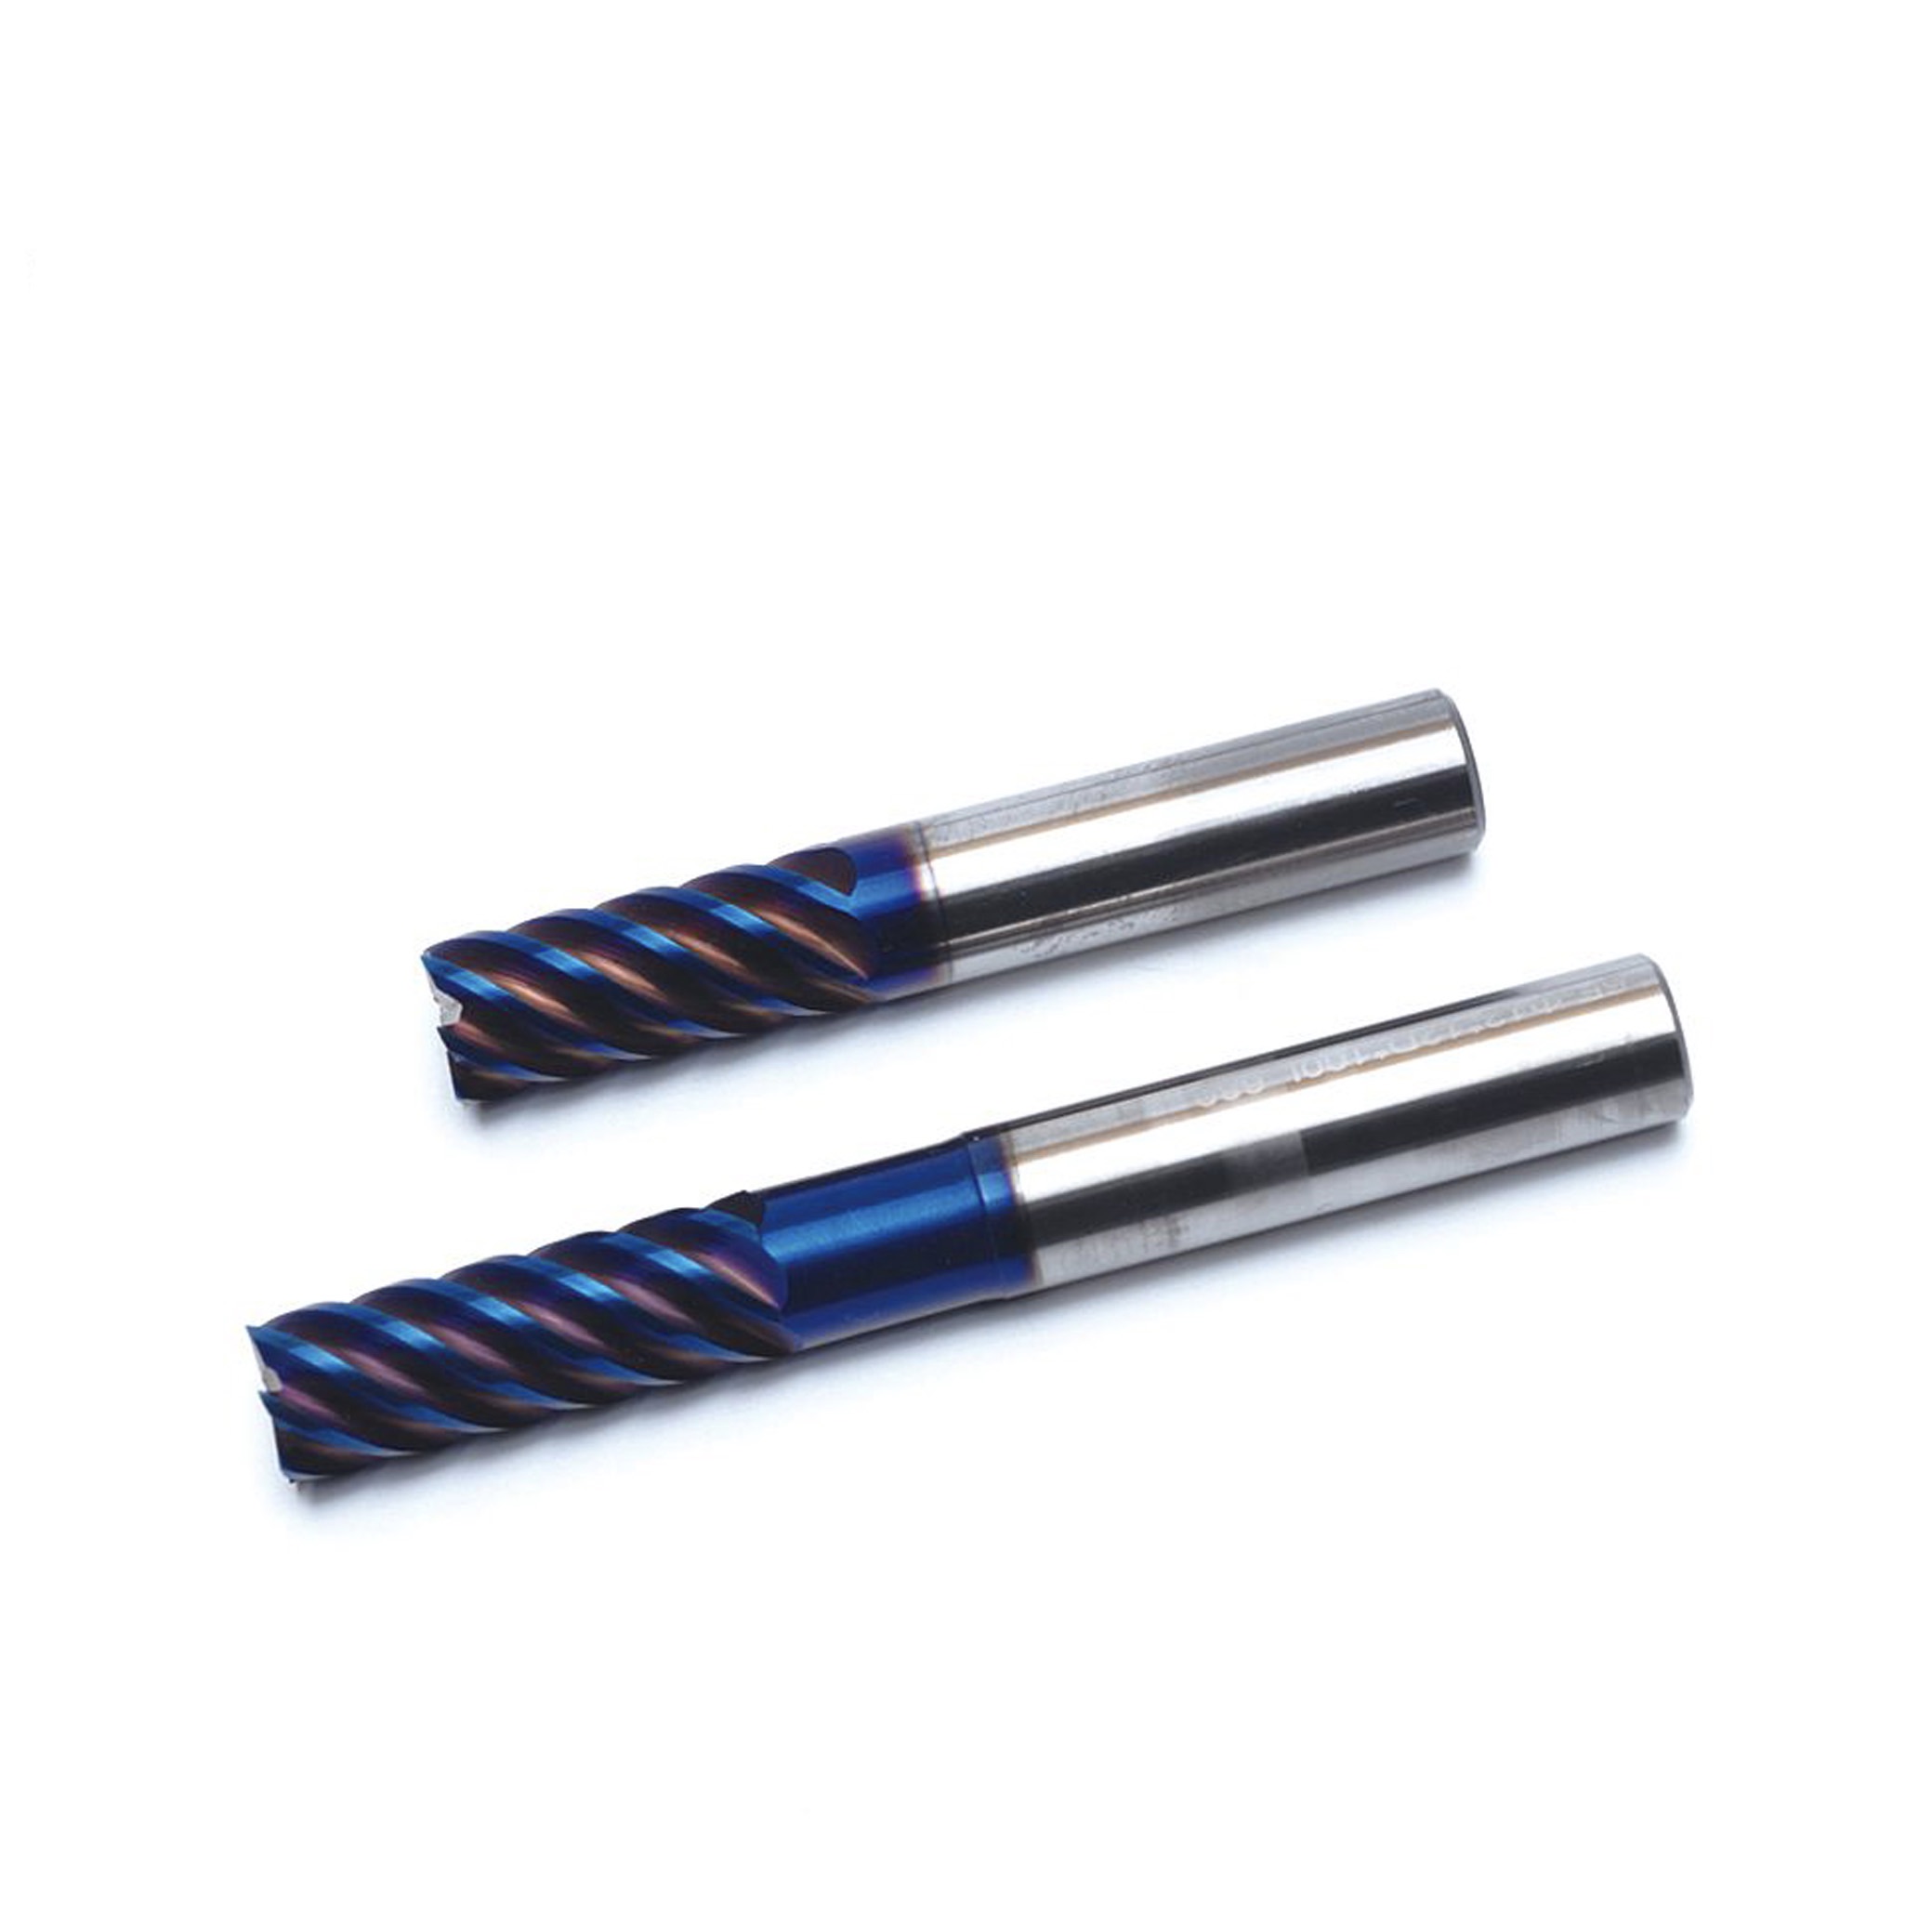 2-3/4 Overall Length 7/16 Shank 7/16 Diameter 4 Flute Kodiak Cutting Tools KCT133483 USA Made Solid Carbide End Mill Coated 1 Length of Cut 